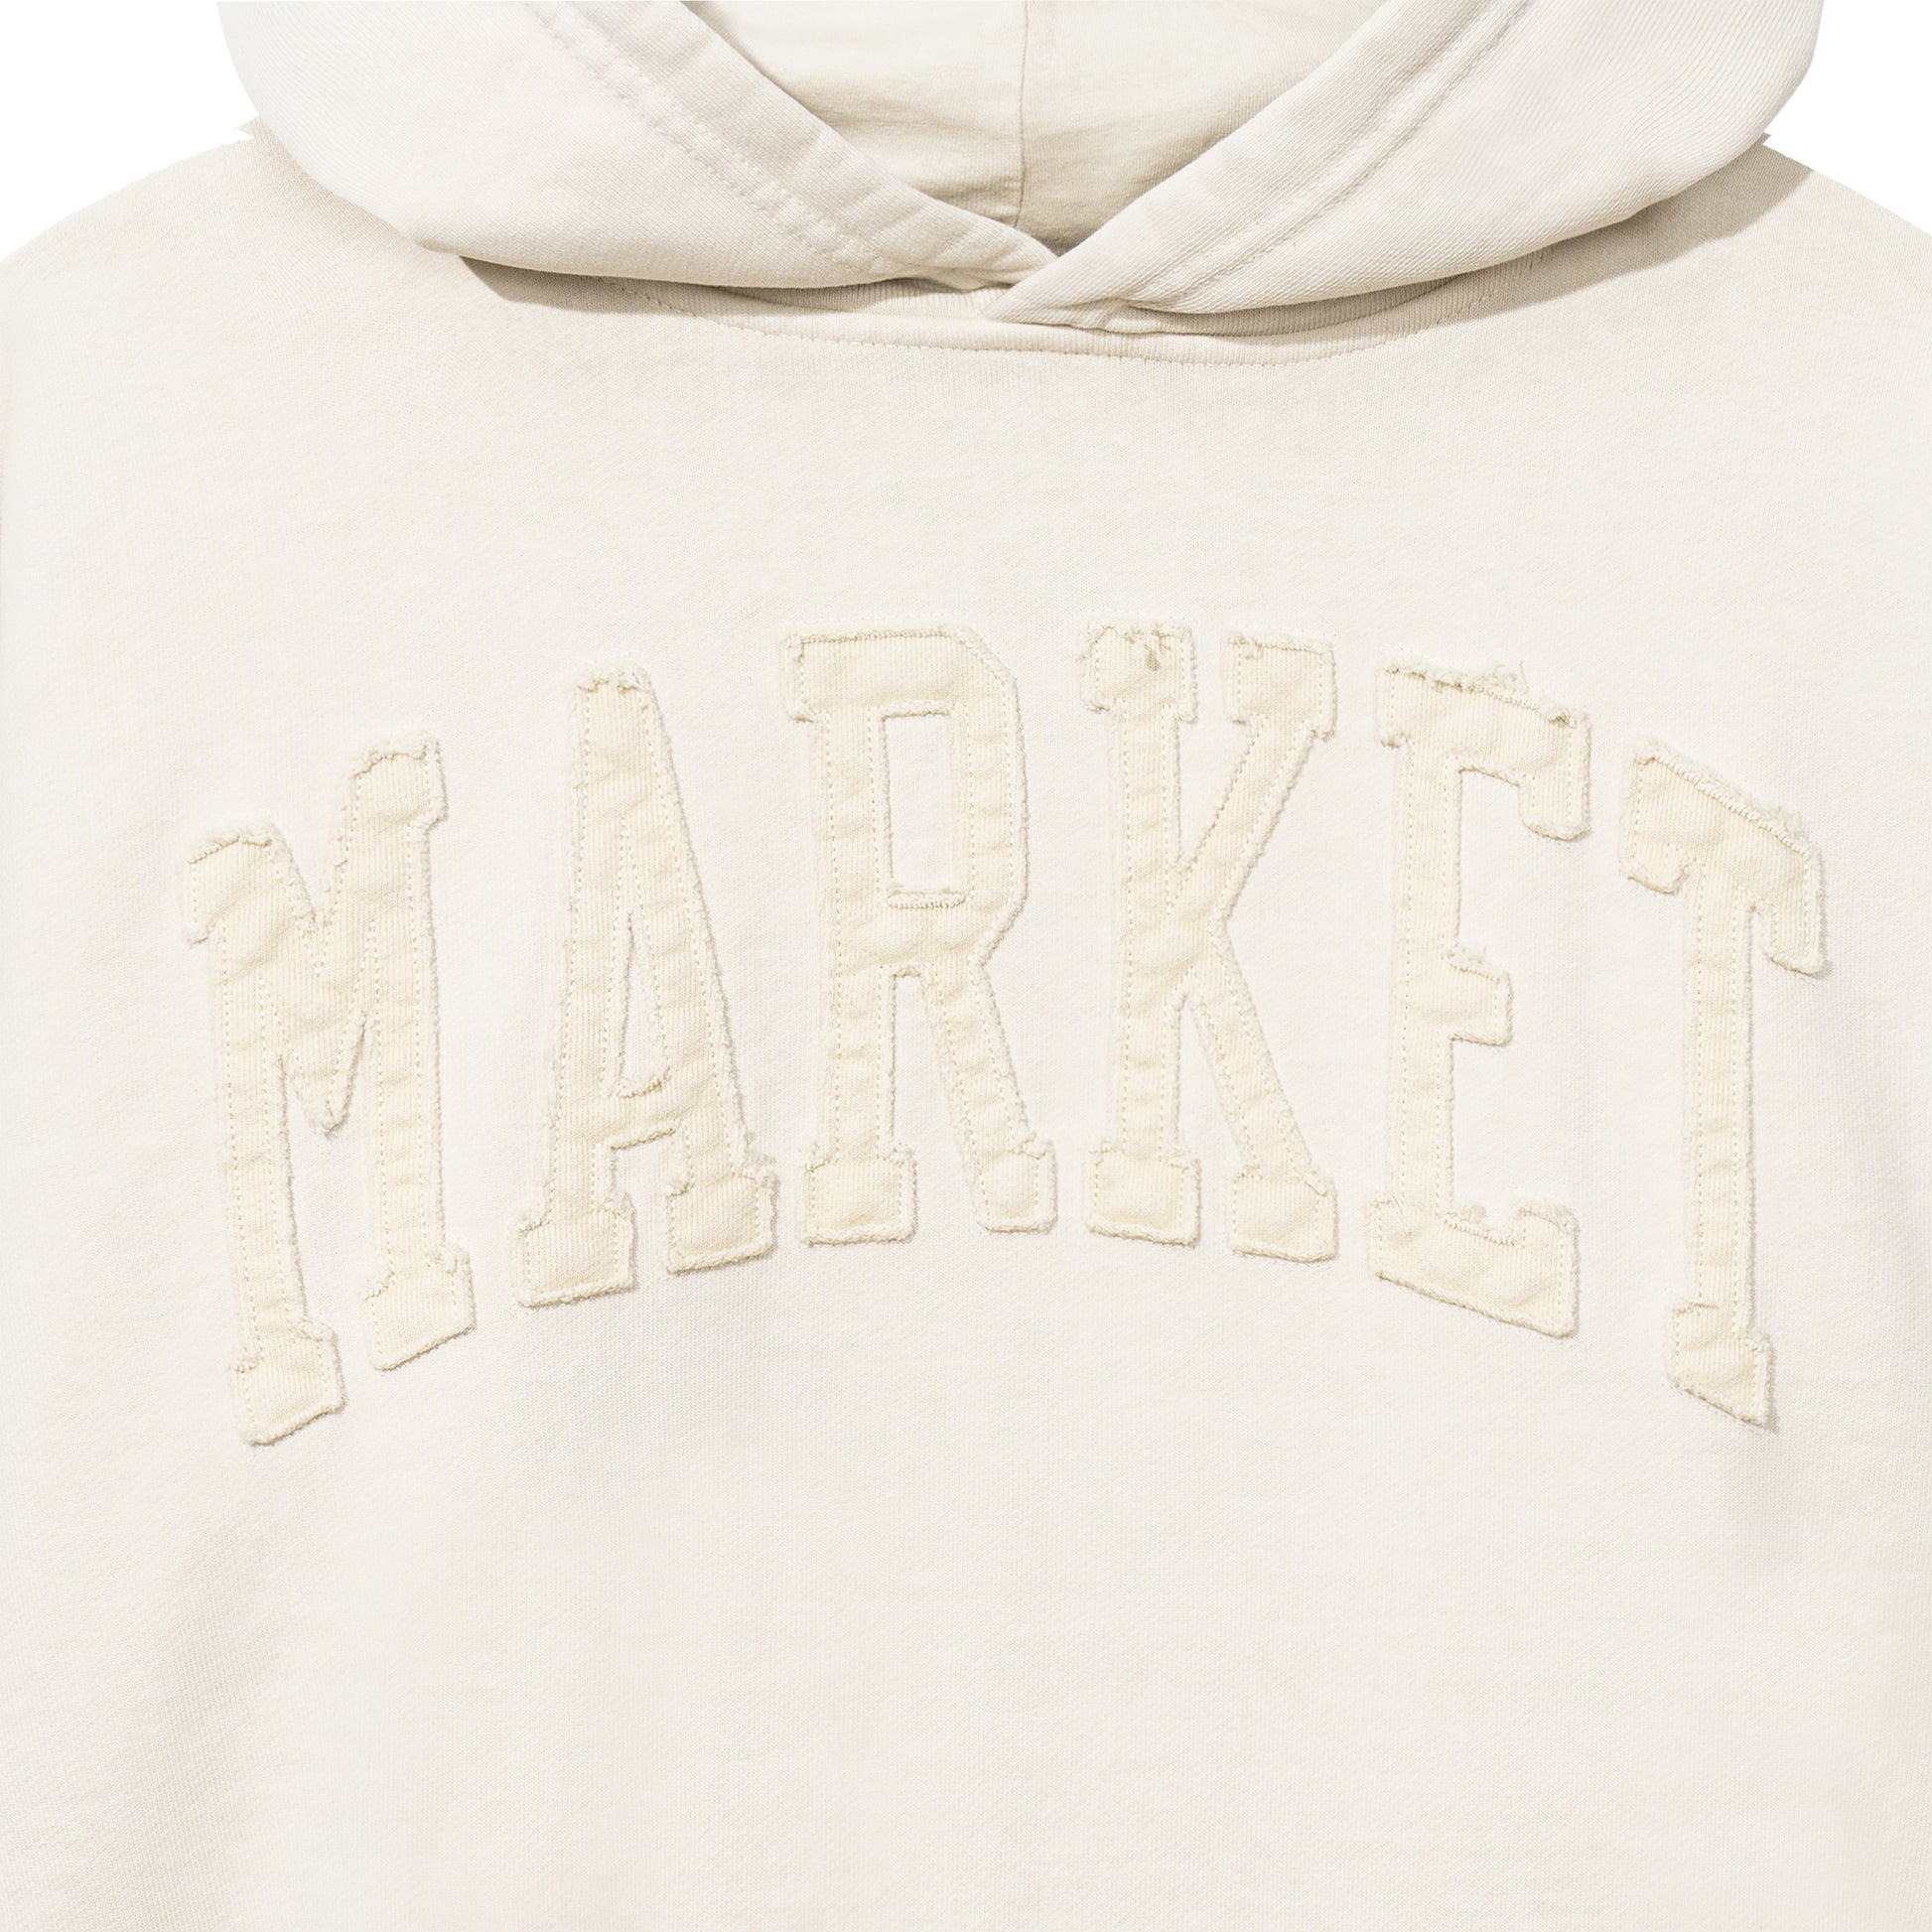 MARKET clothing brand VINTAGE WASH ARC HOODIE. Find more graphic tees, hats and more at MarketStudios.com. Formally Chinatown Market.